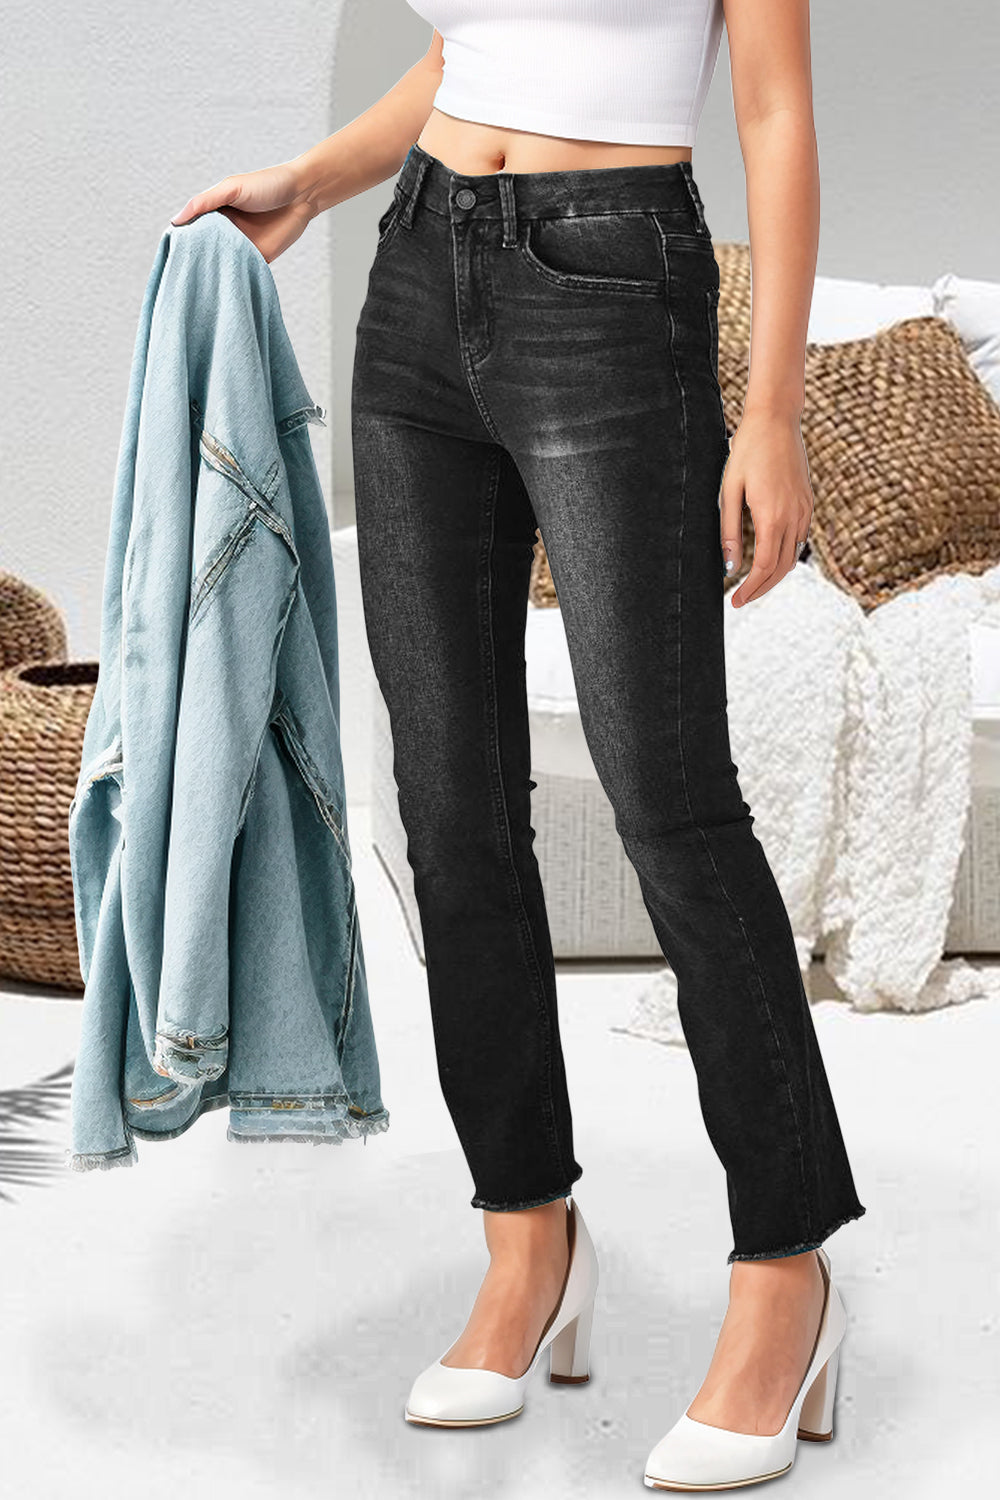 Mid-Rise Waist Skinny Jeans with Pockets